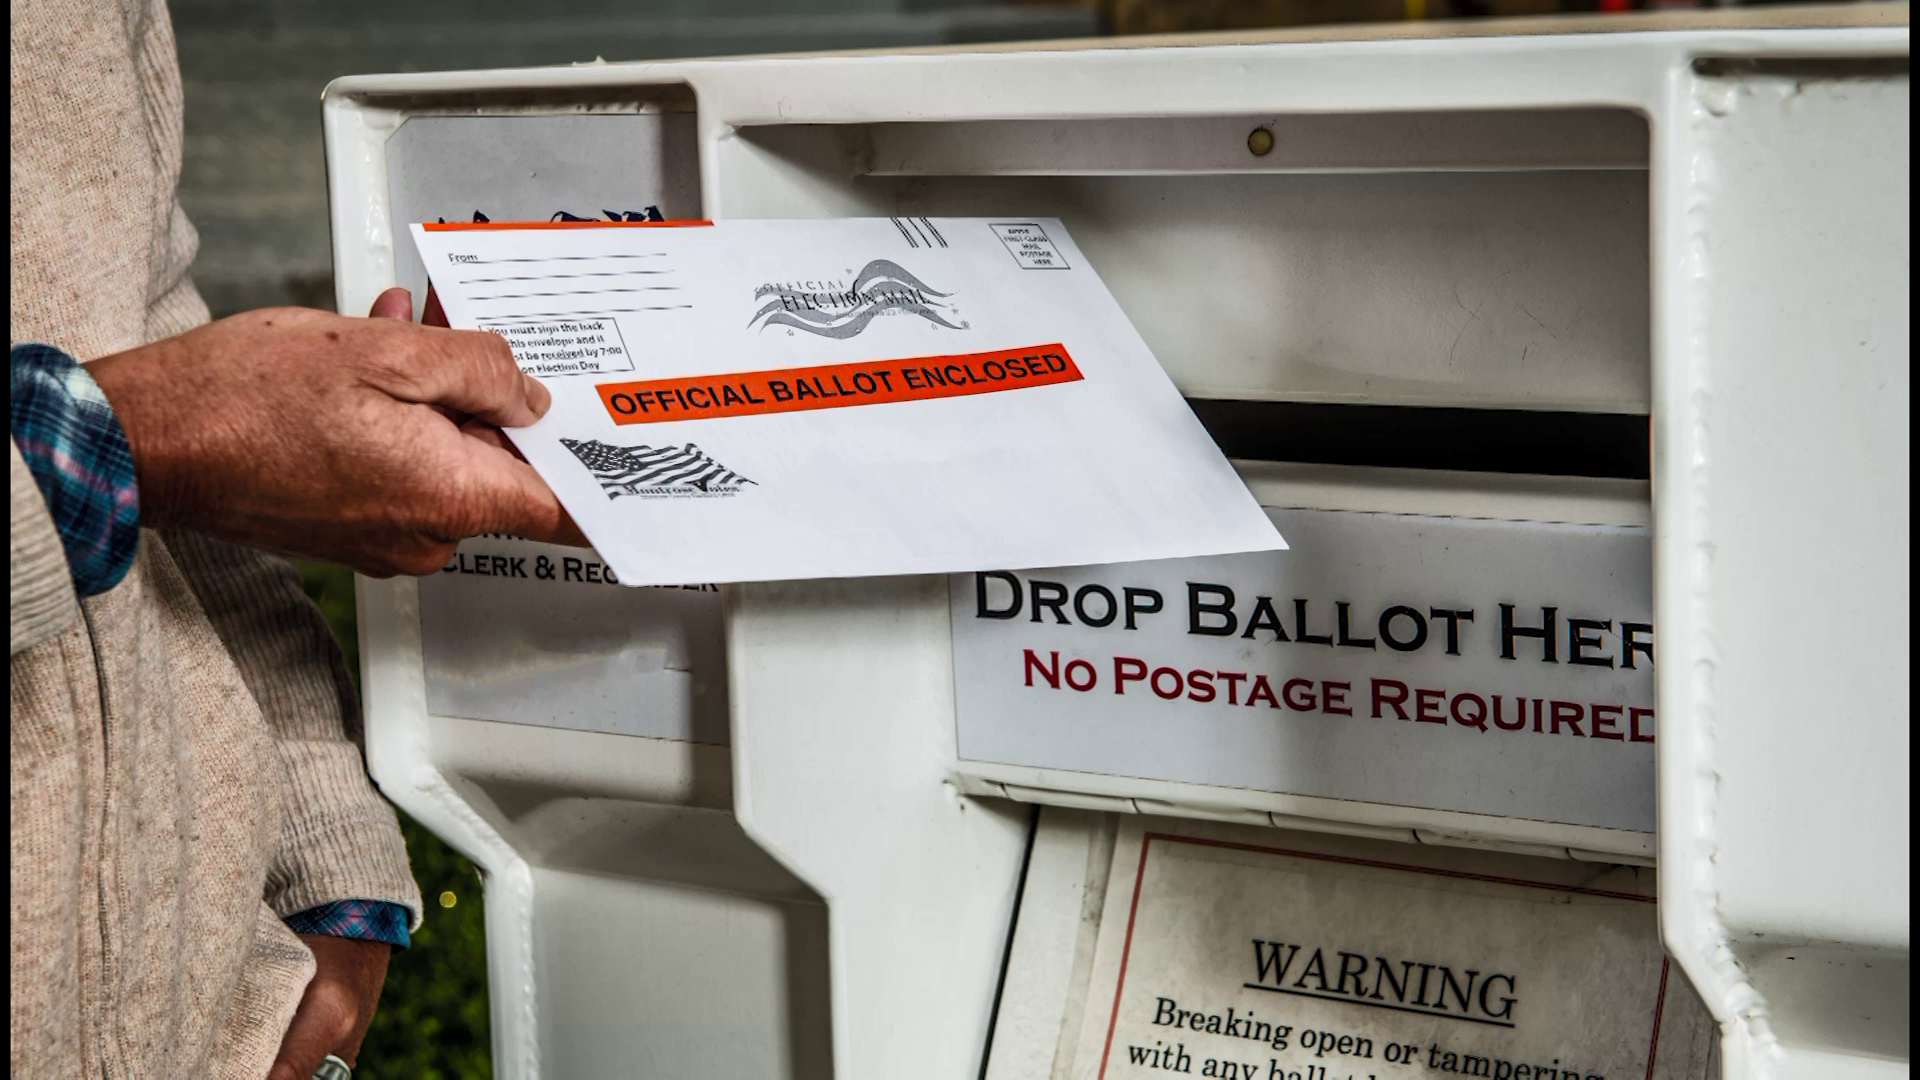 When you’re voting in person, your vote is submitted right then and there. But voting by mail has a few more steps.